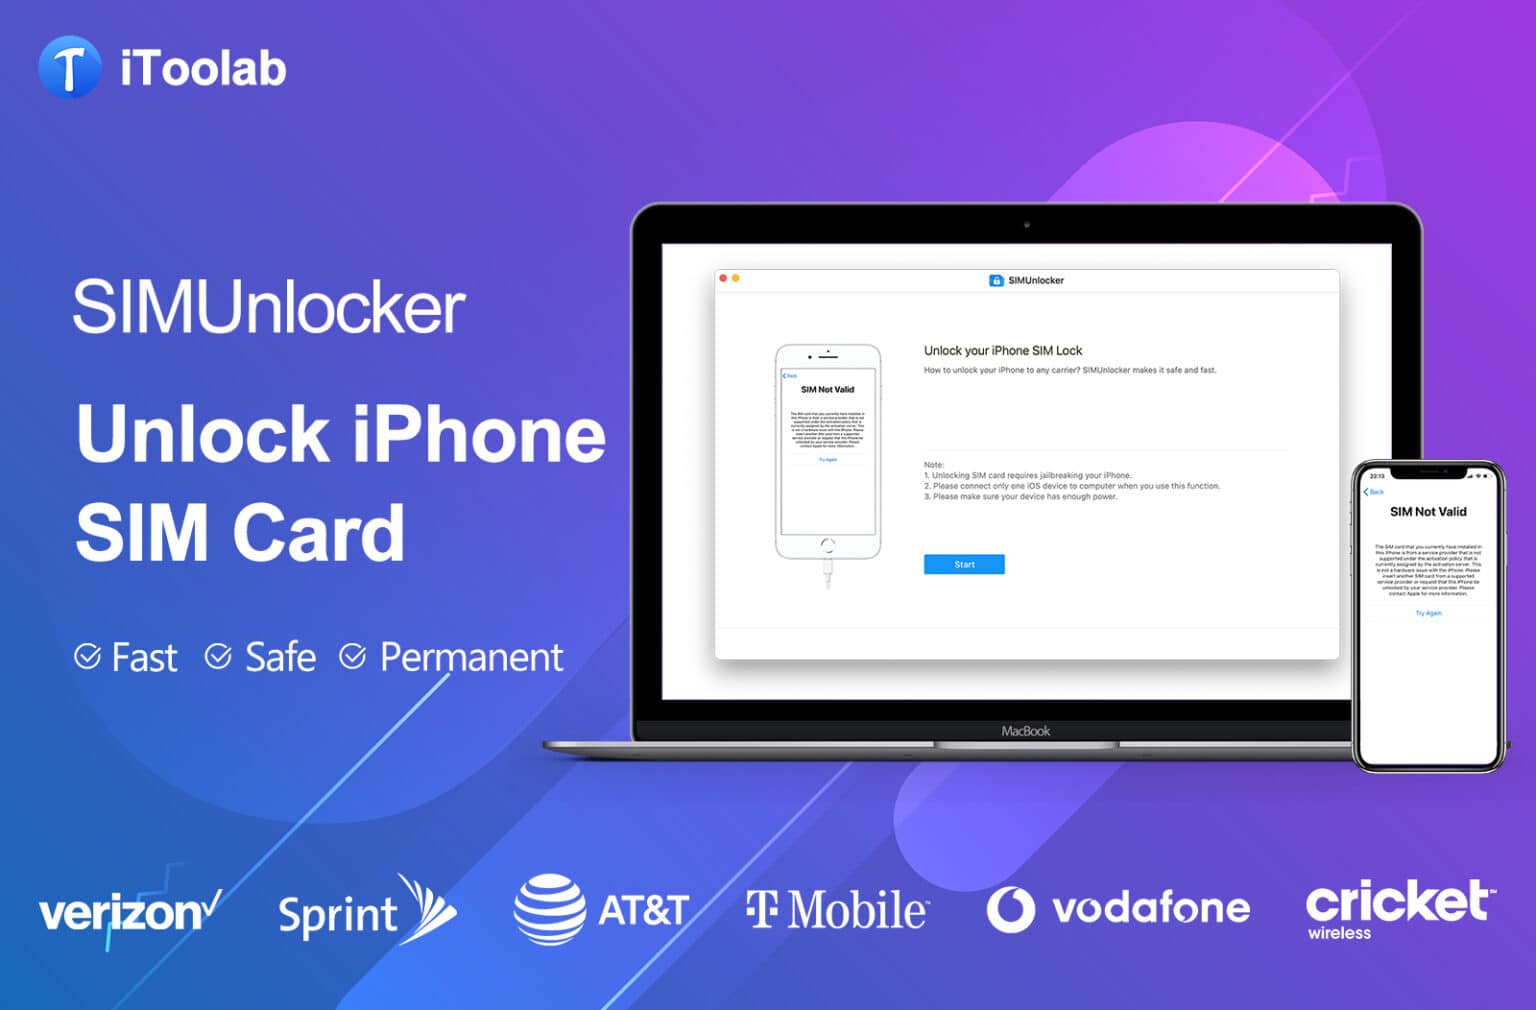 When you need to unlock your iPhone's SIM card, iTooLab SIMUnlocker helps you do it.